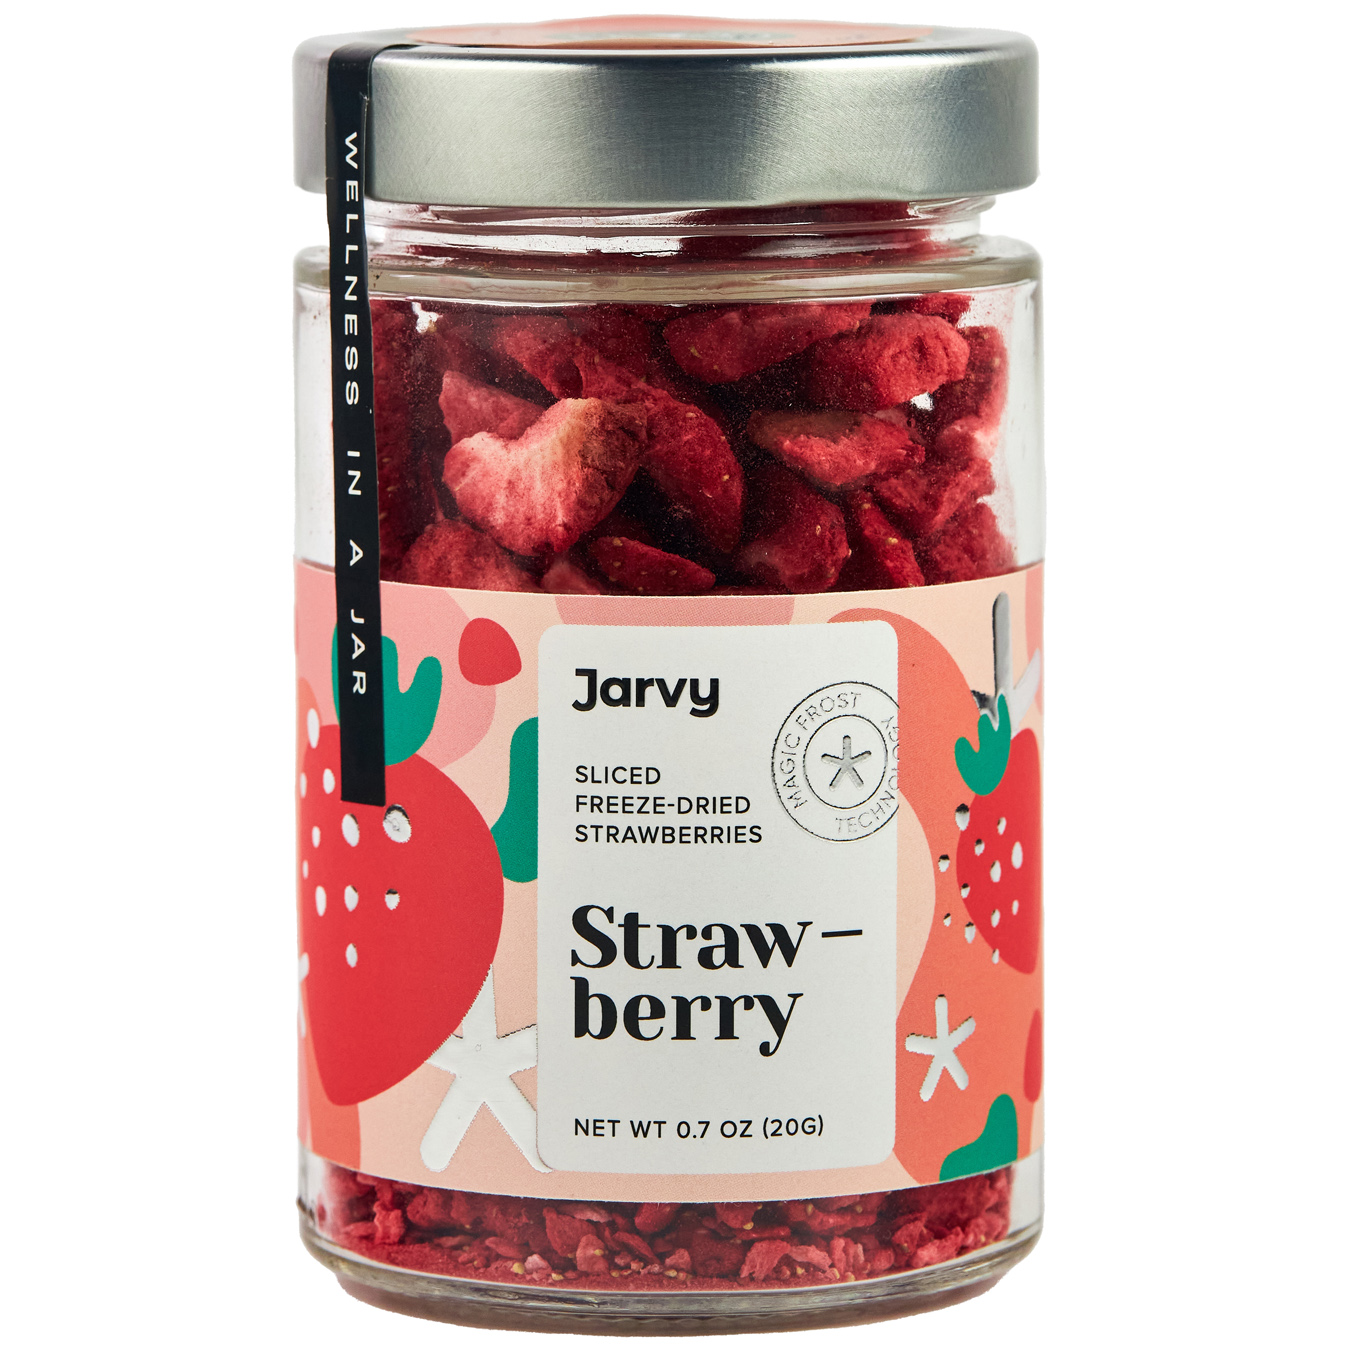 Jarvy sublimated strawberry slices 20g